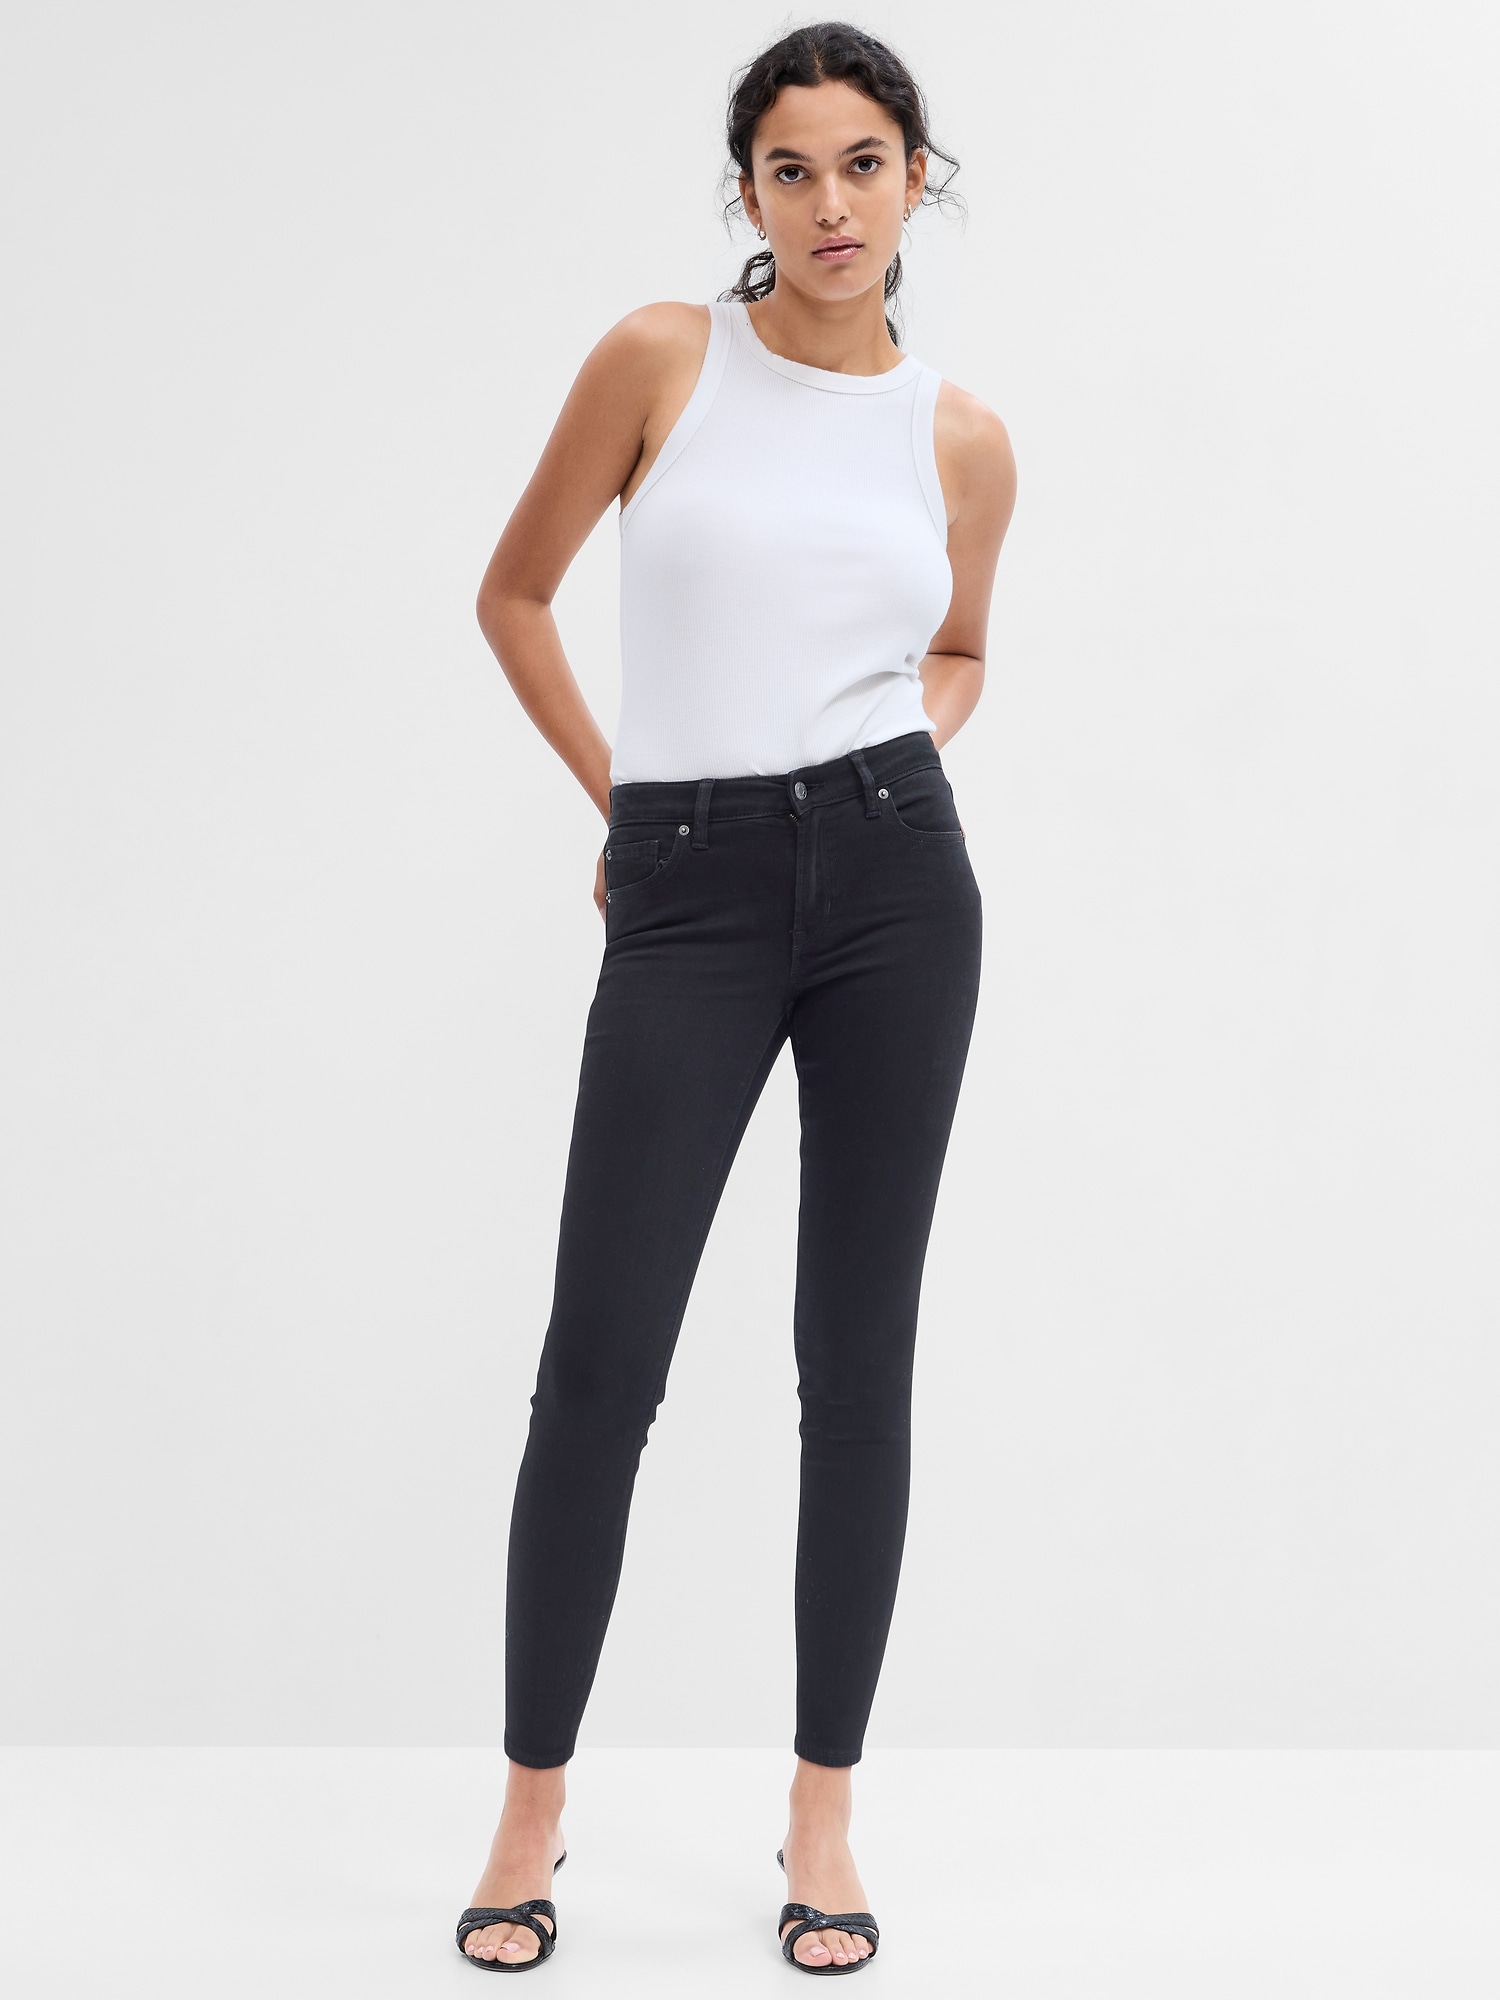 Express Black Stretch Mid Rise Ankle Legging Jeans NWT- Size 8L (Insea –  The Saved Collection